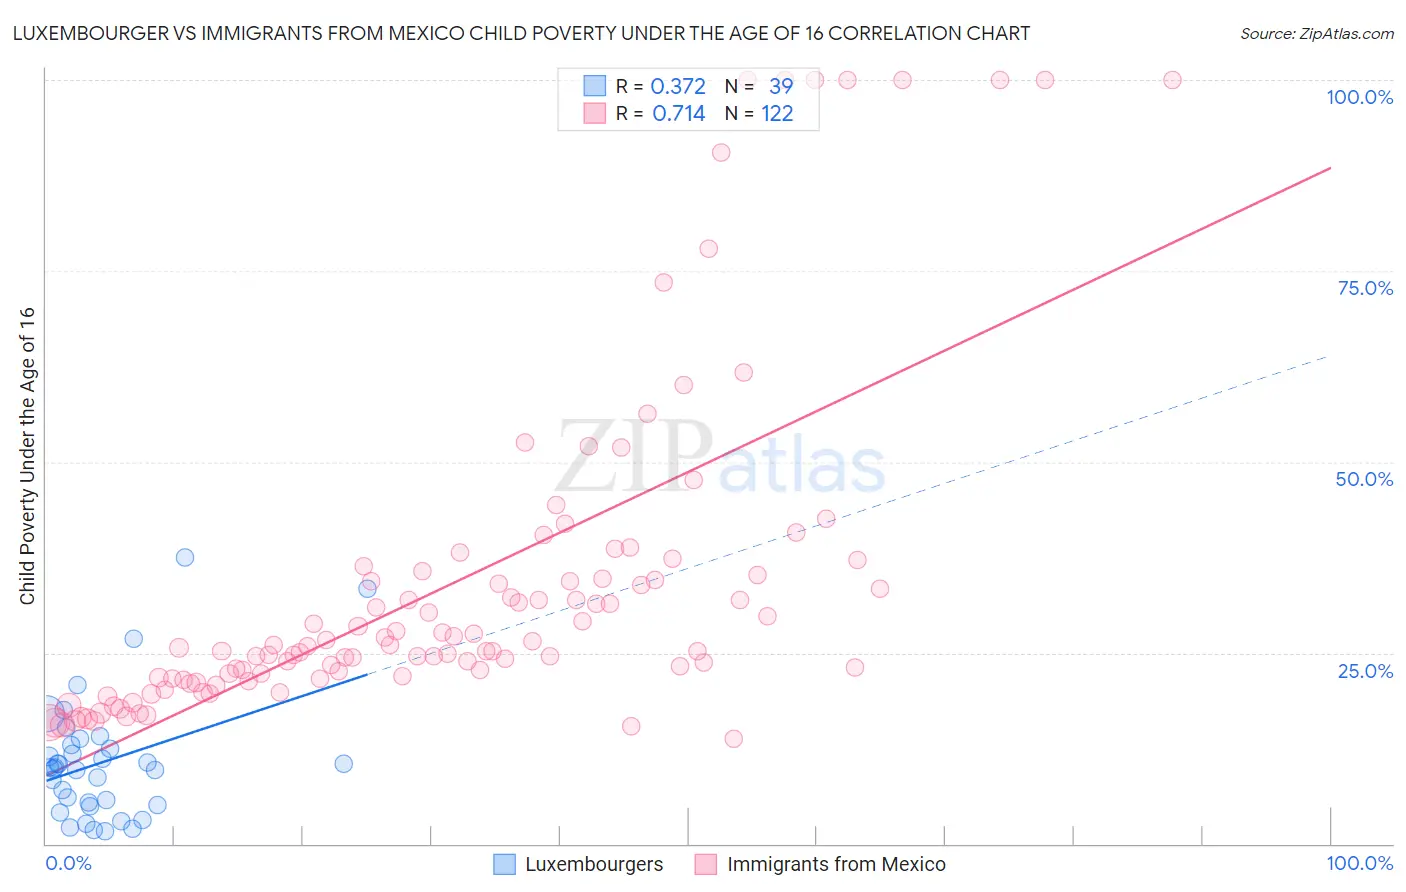 Luxembourger vs Immigrants from Mexico Child Poverty Under the Age of 16